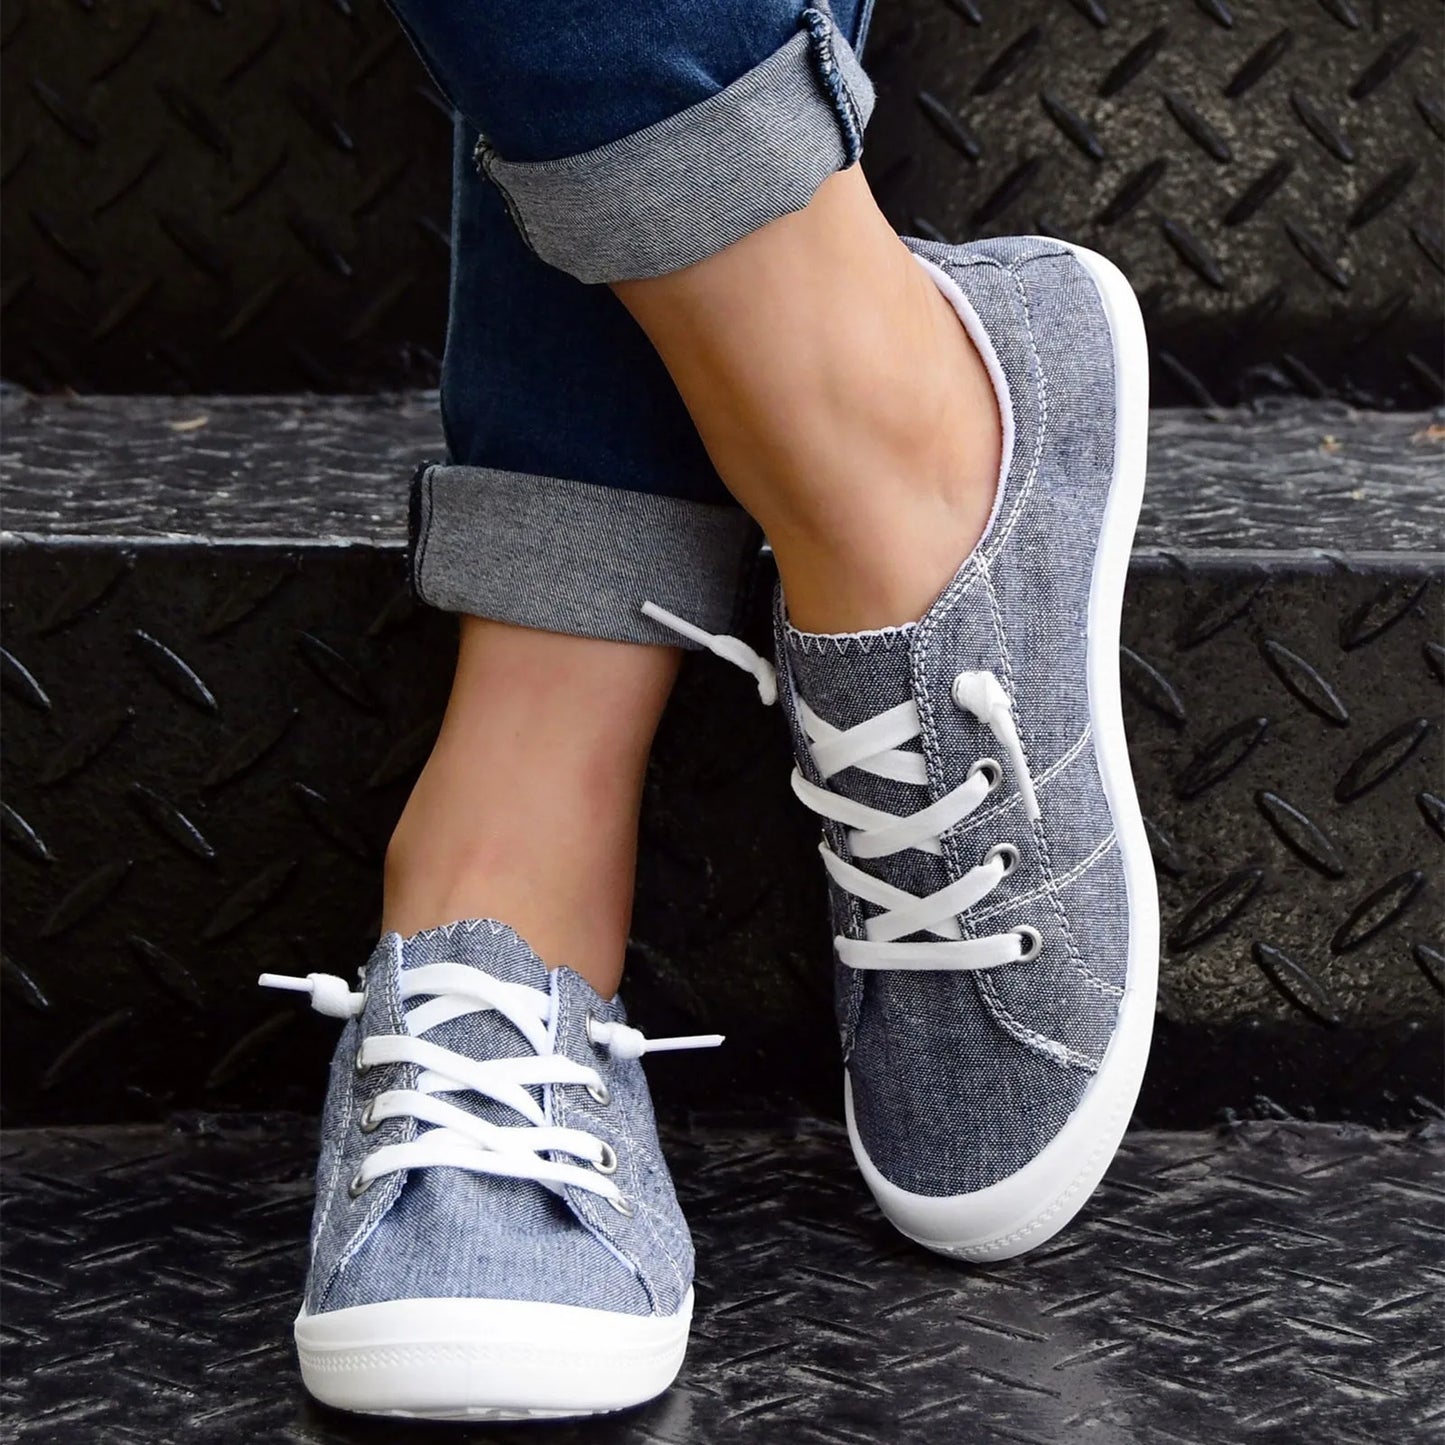 Canvas Fashion Casual Shoes Women Platform Sneakers/Shoes High Quality Light Weight Solid Sports Shoes